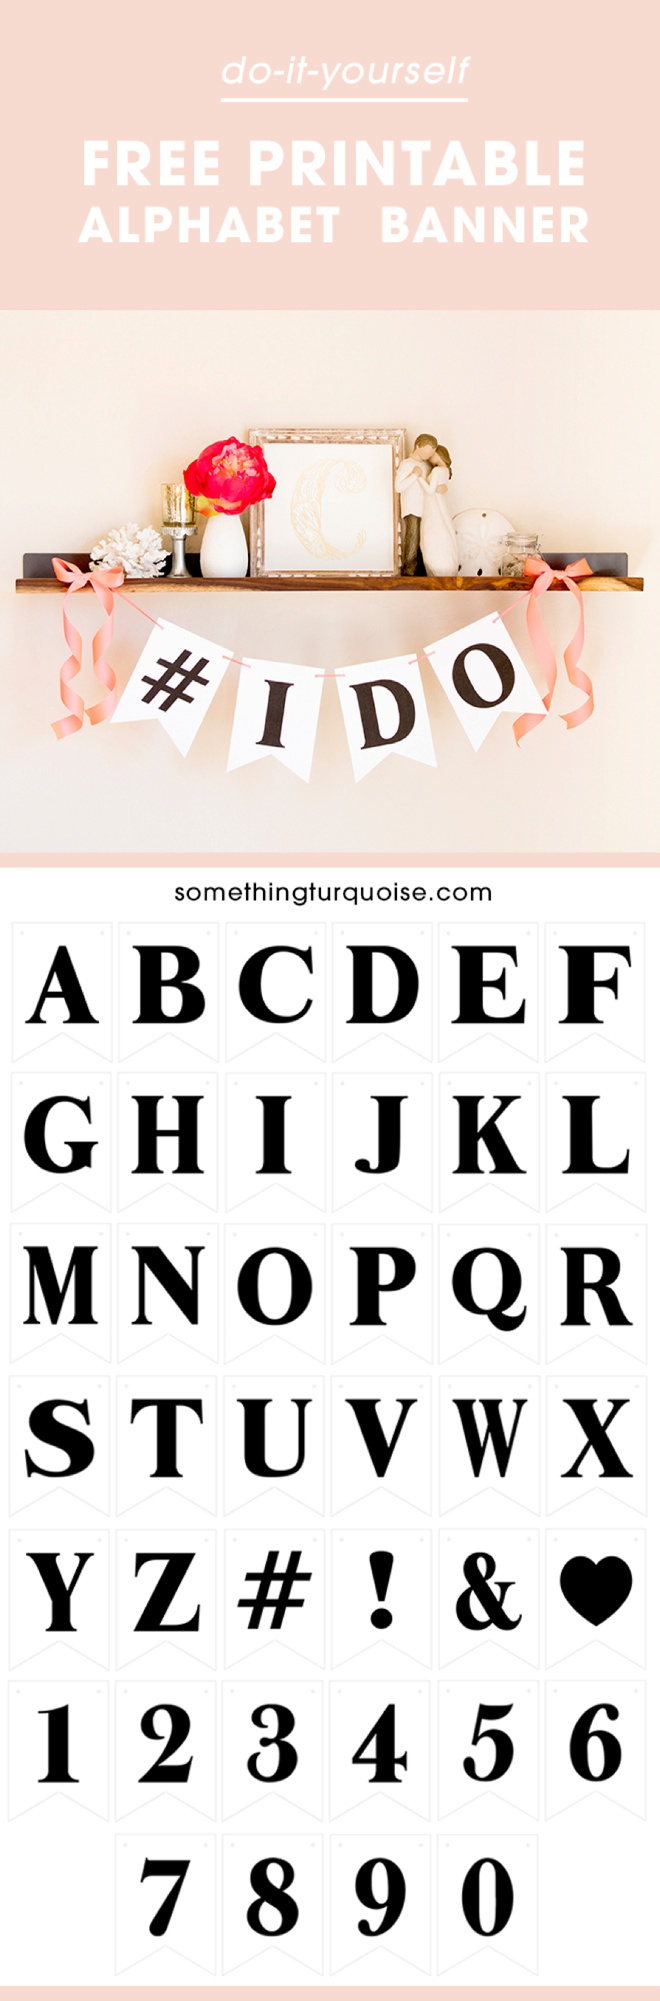 Free Printable Alphabet And Number Banner! Adorable! Pertaining To Diy Banner Template Free